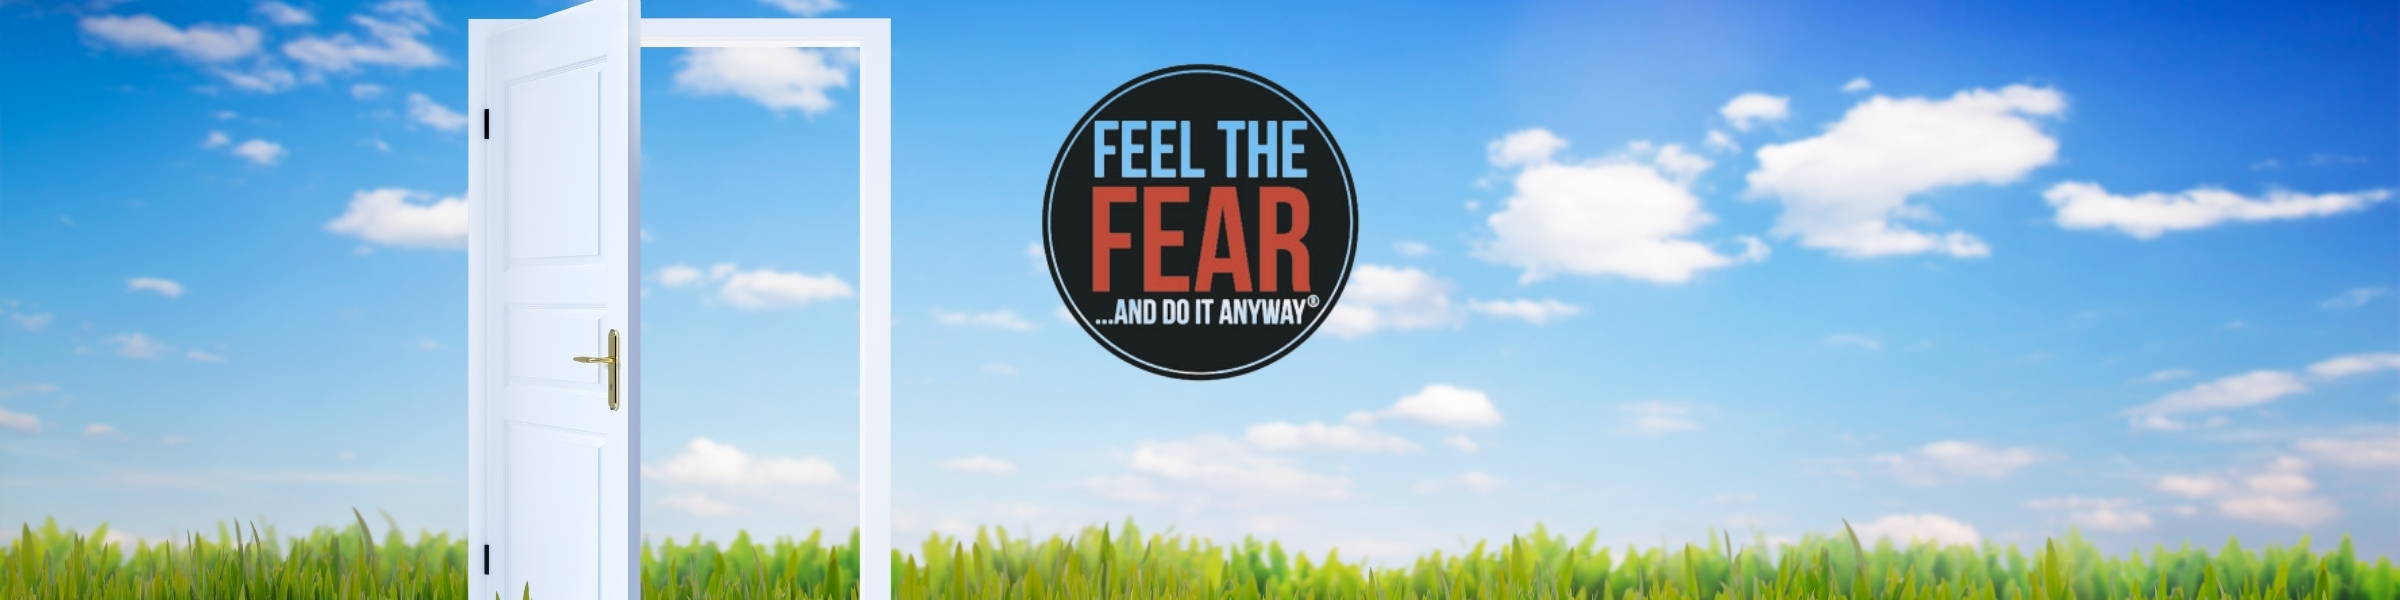 Feel The Fear...And Do It Anyway